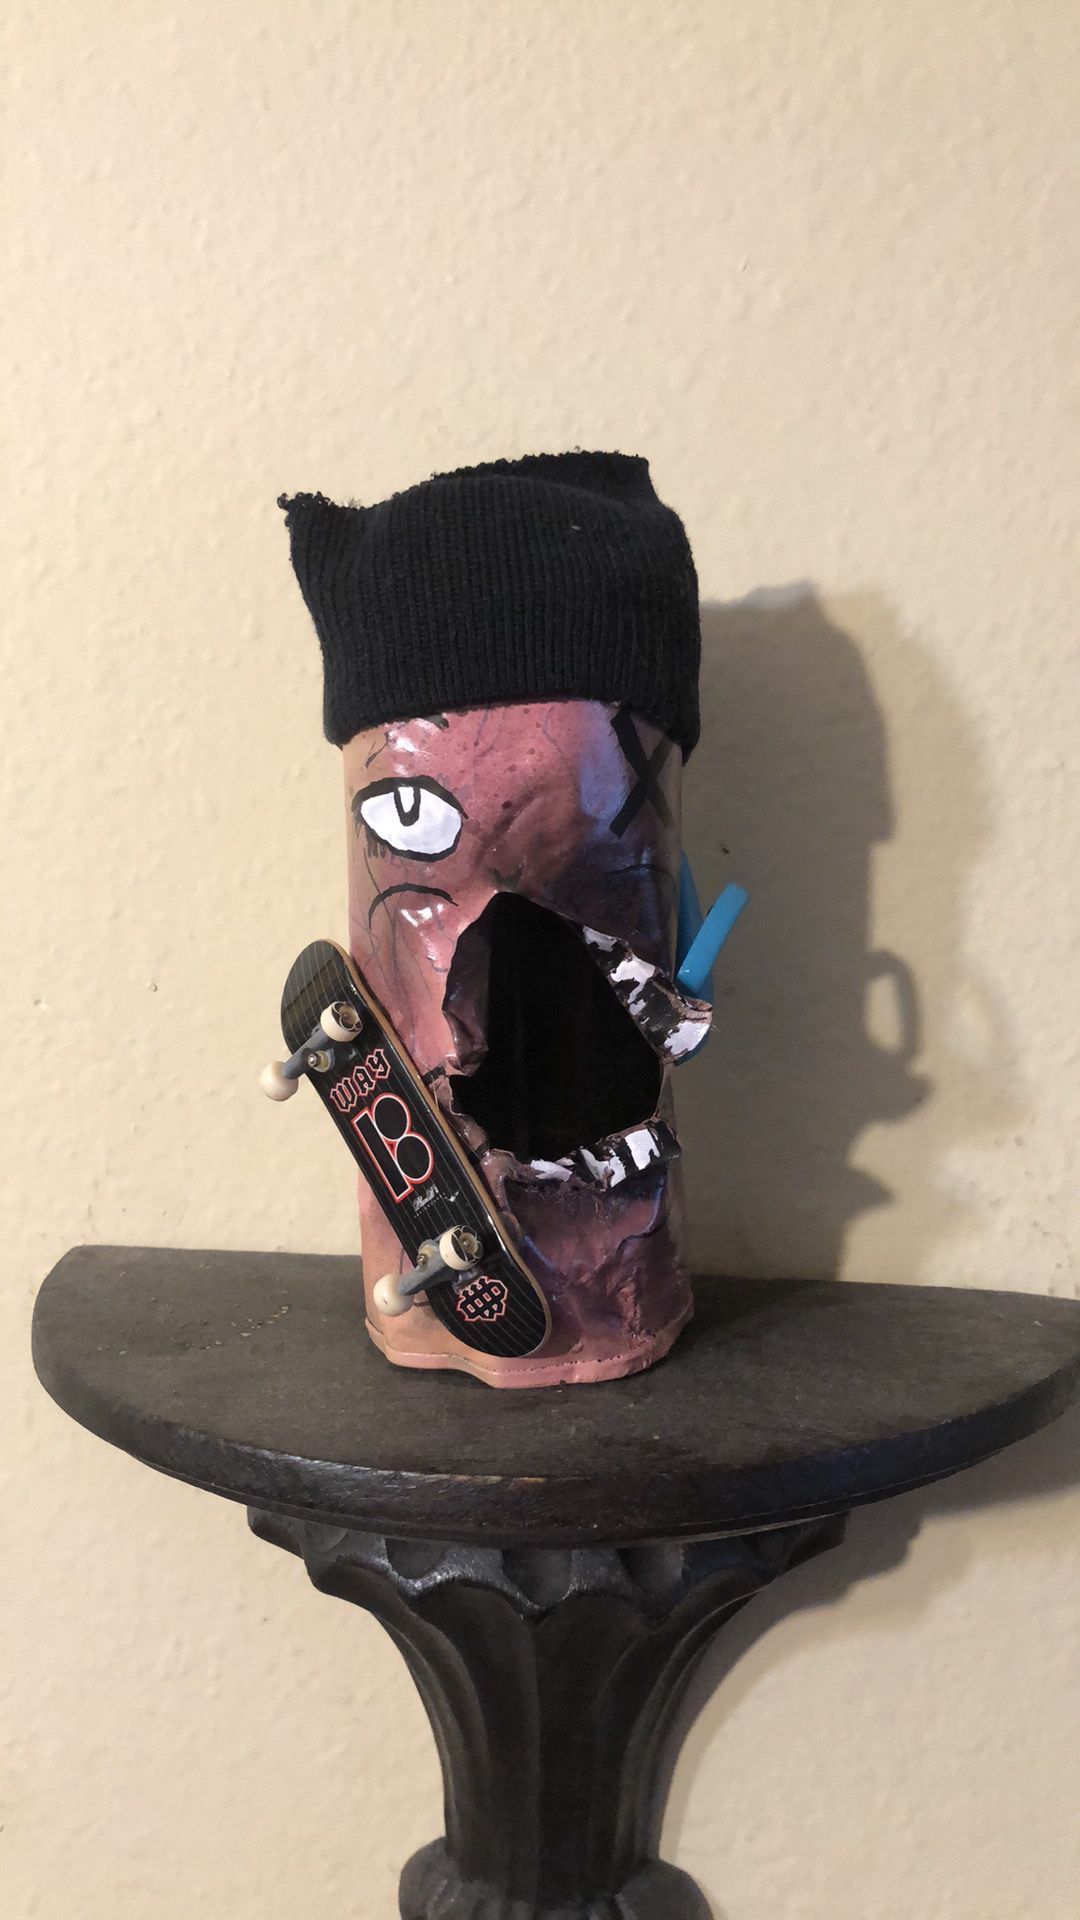 Skate rat sculpture graffiti skateboard art custom handmade by me using mixed mediums of recycled spray can and toys of tech deck, backpack. Painted w